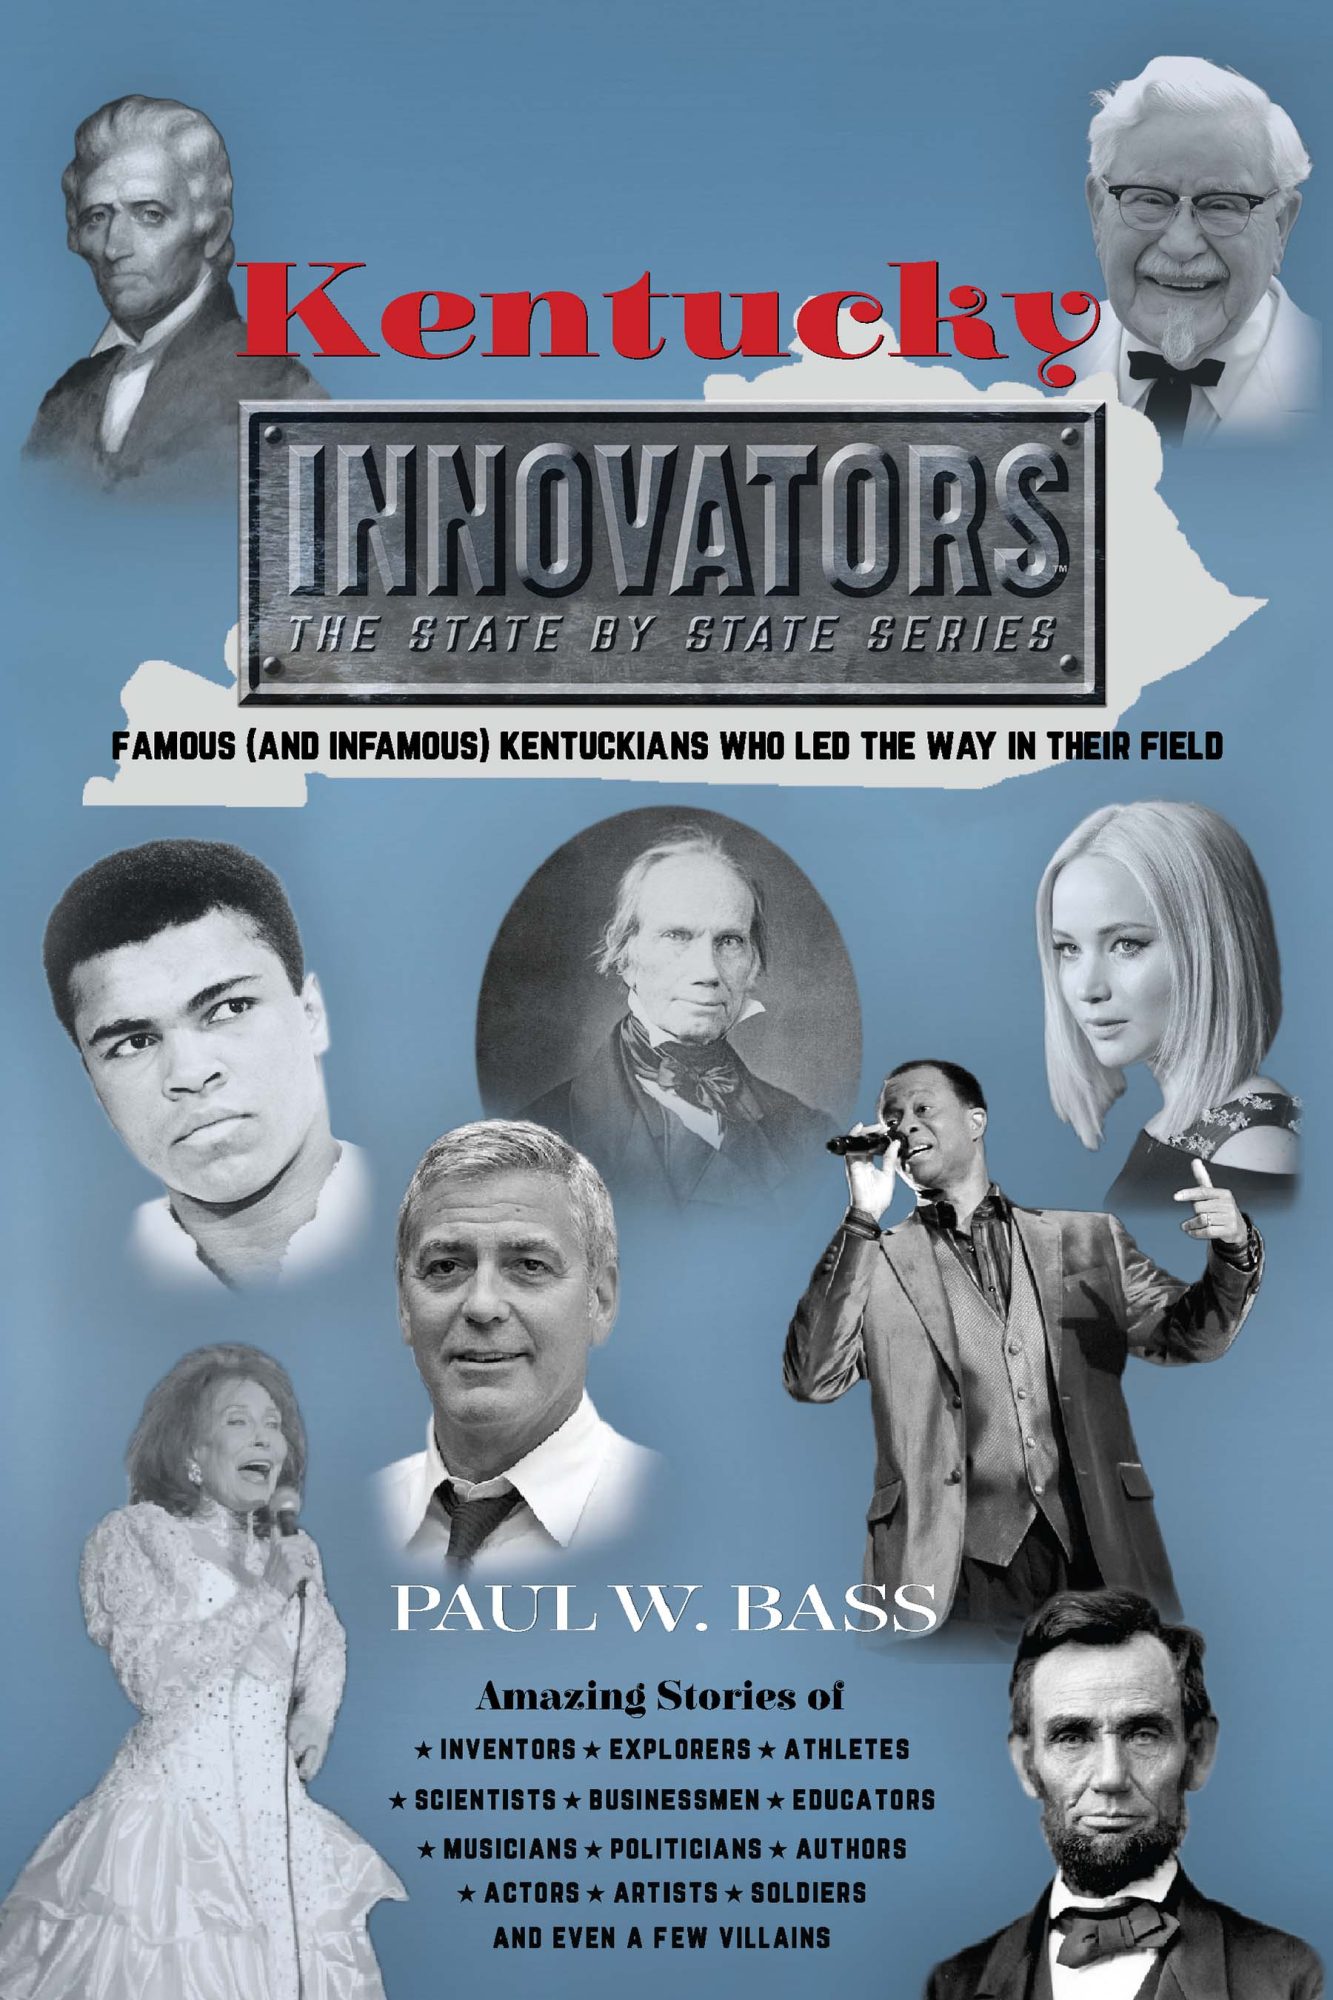 Kentucky Innovators: Famous (and Infamous) Kentuckians Who Led the Way in Their Field